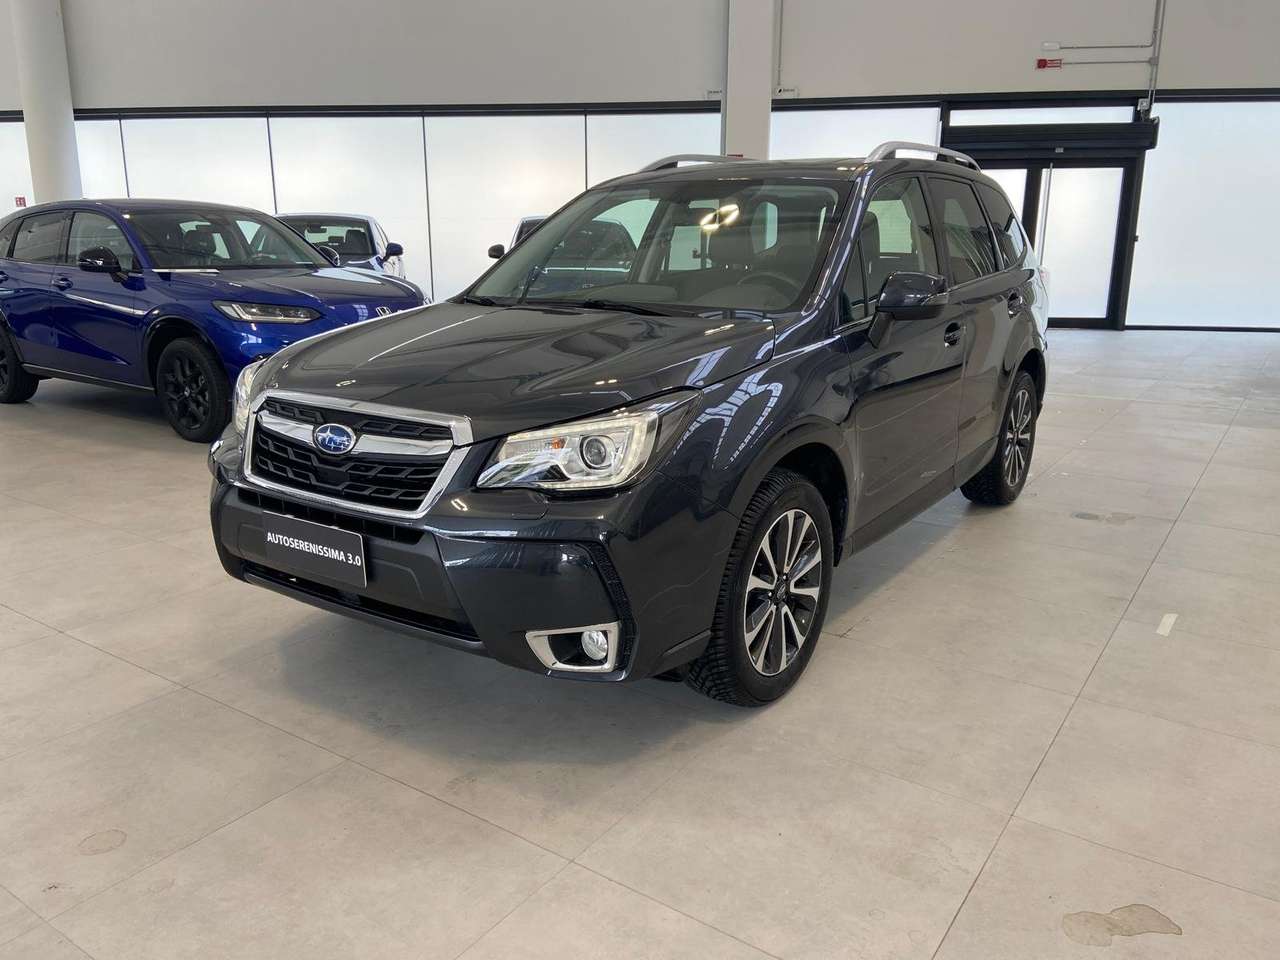 Subaru Forester Forester 2.0d Sport Unlimited lineartronic my16